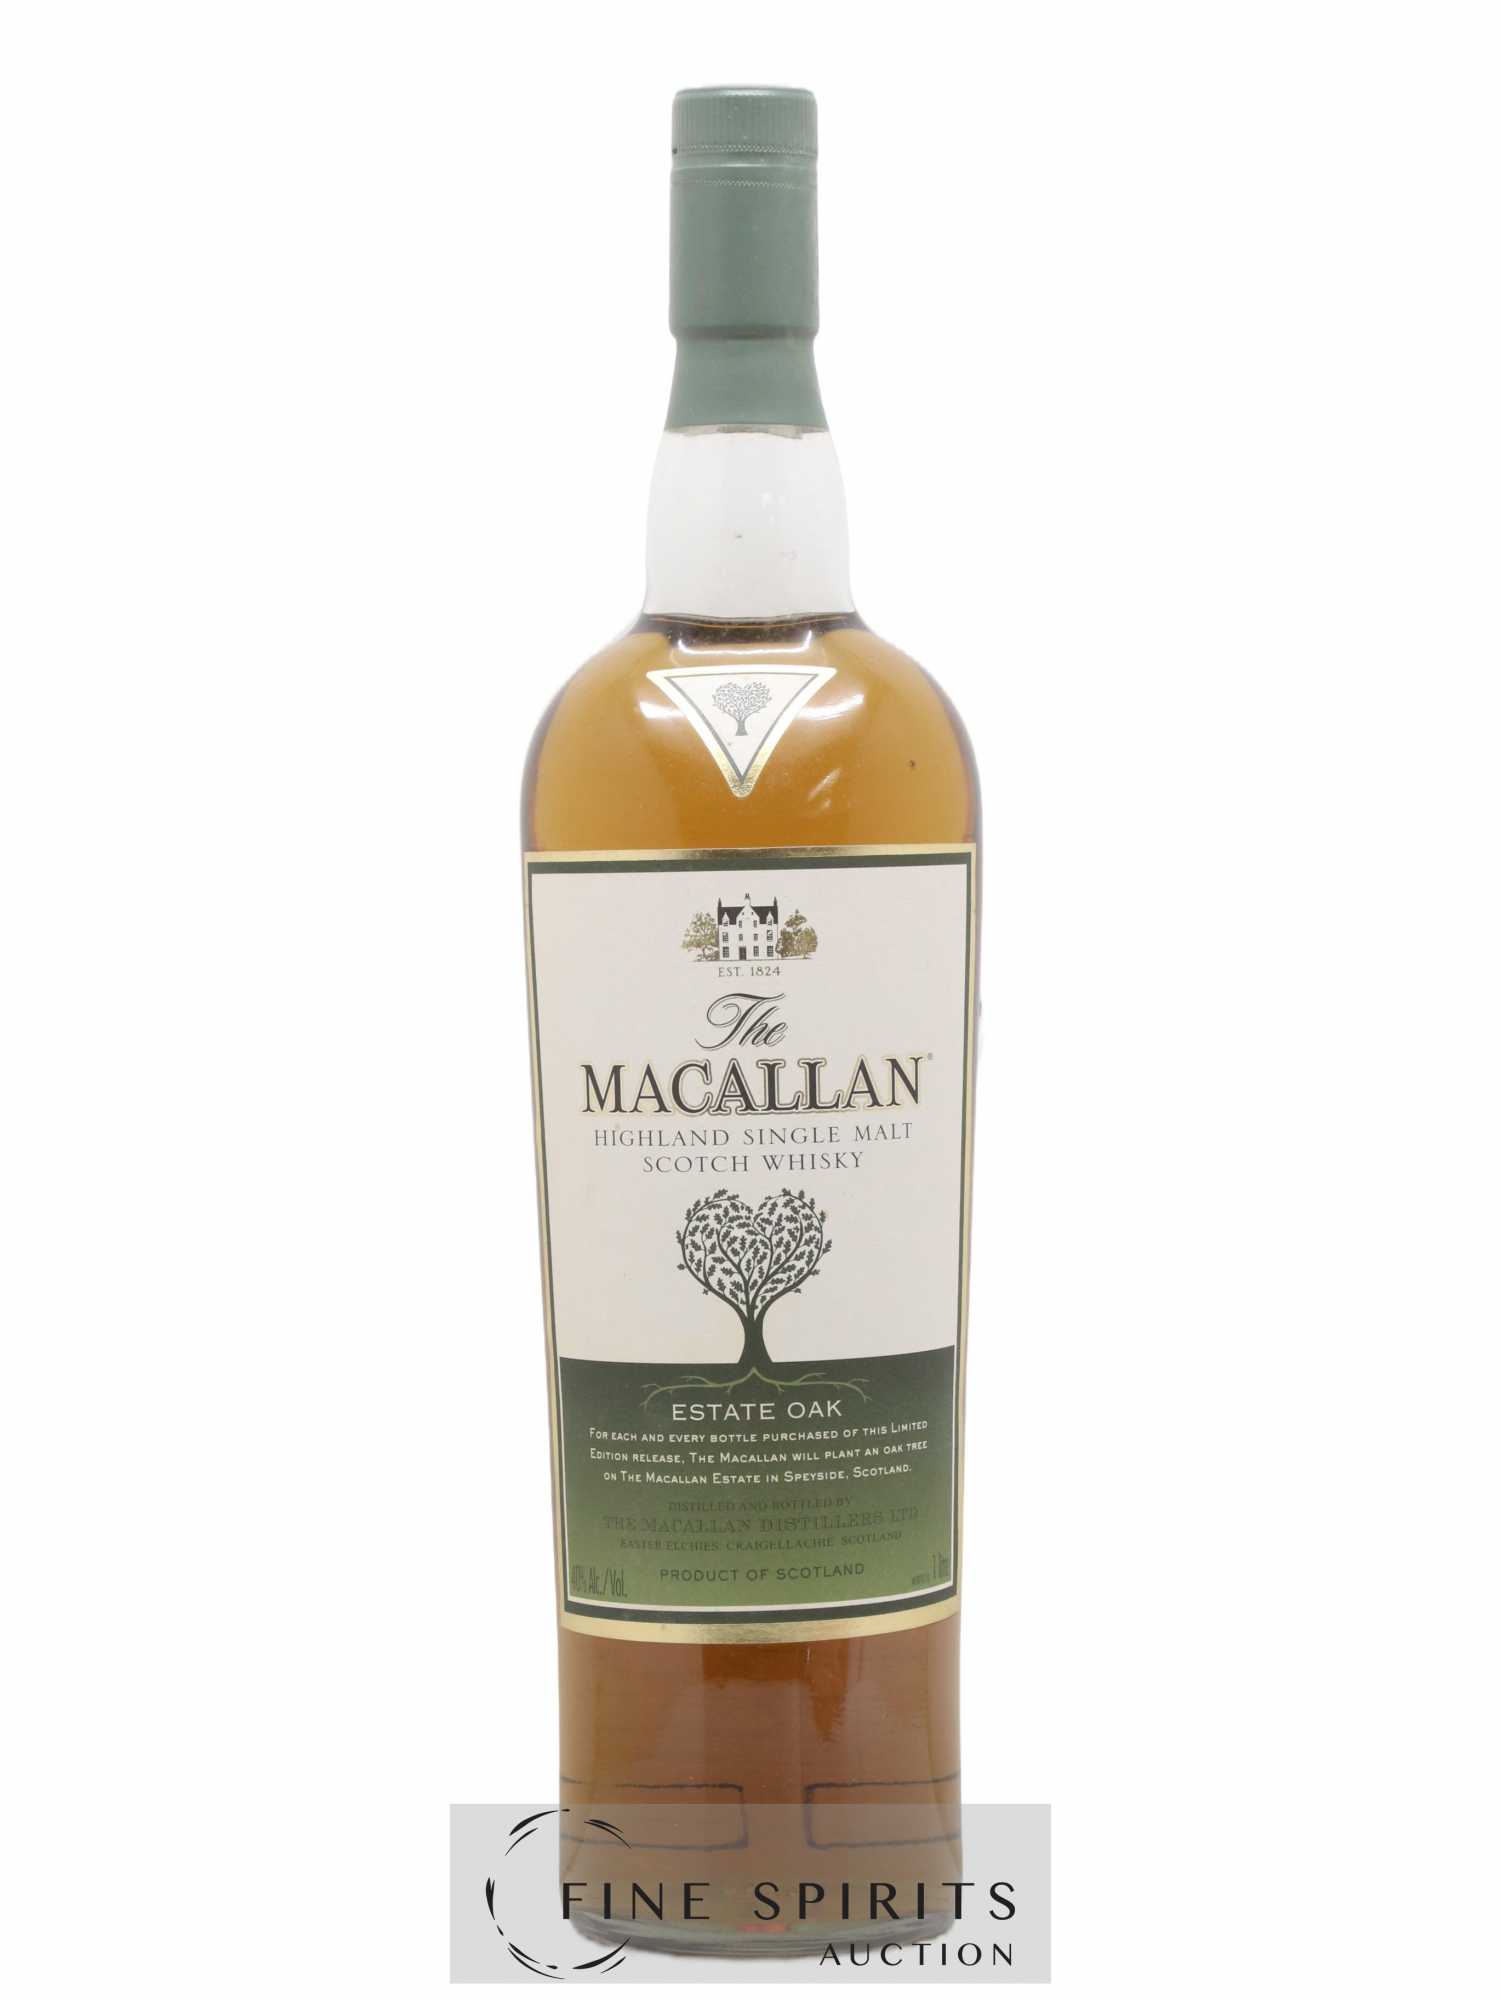 Macallan (The) Of. Estate Oak Limited Edition Release